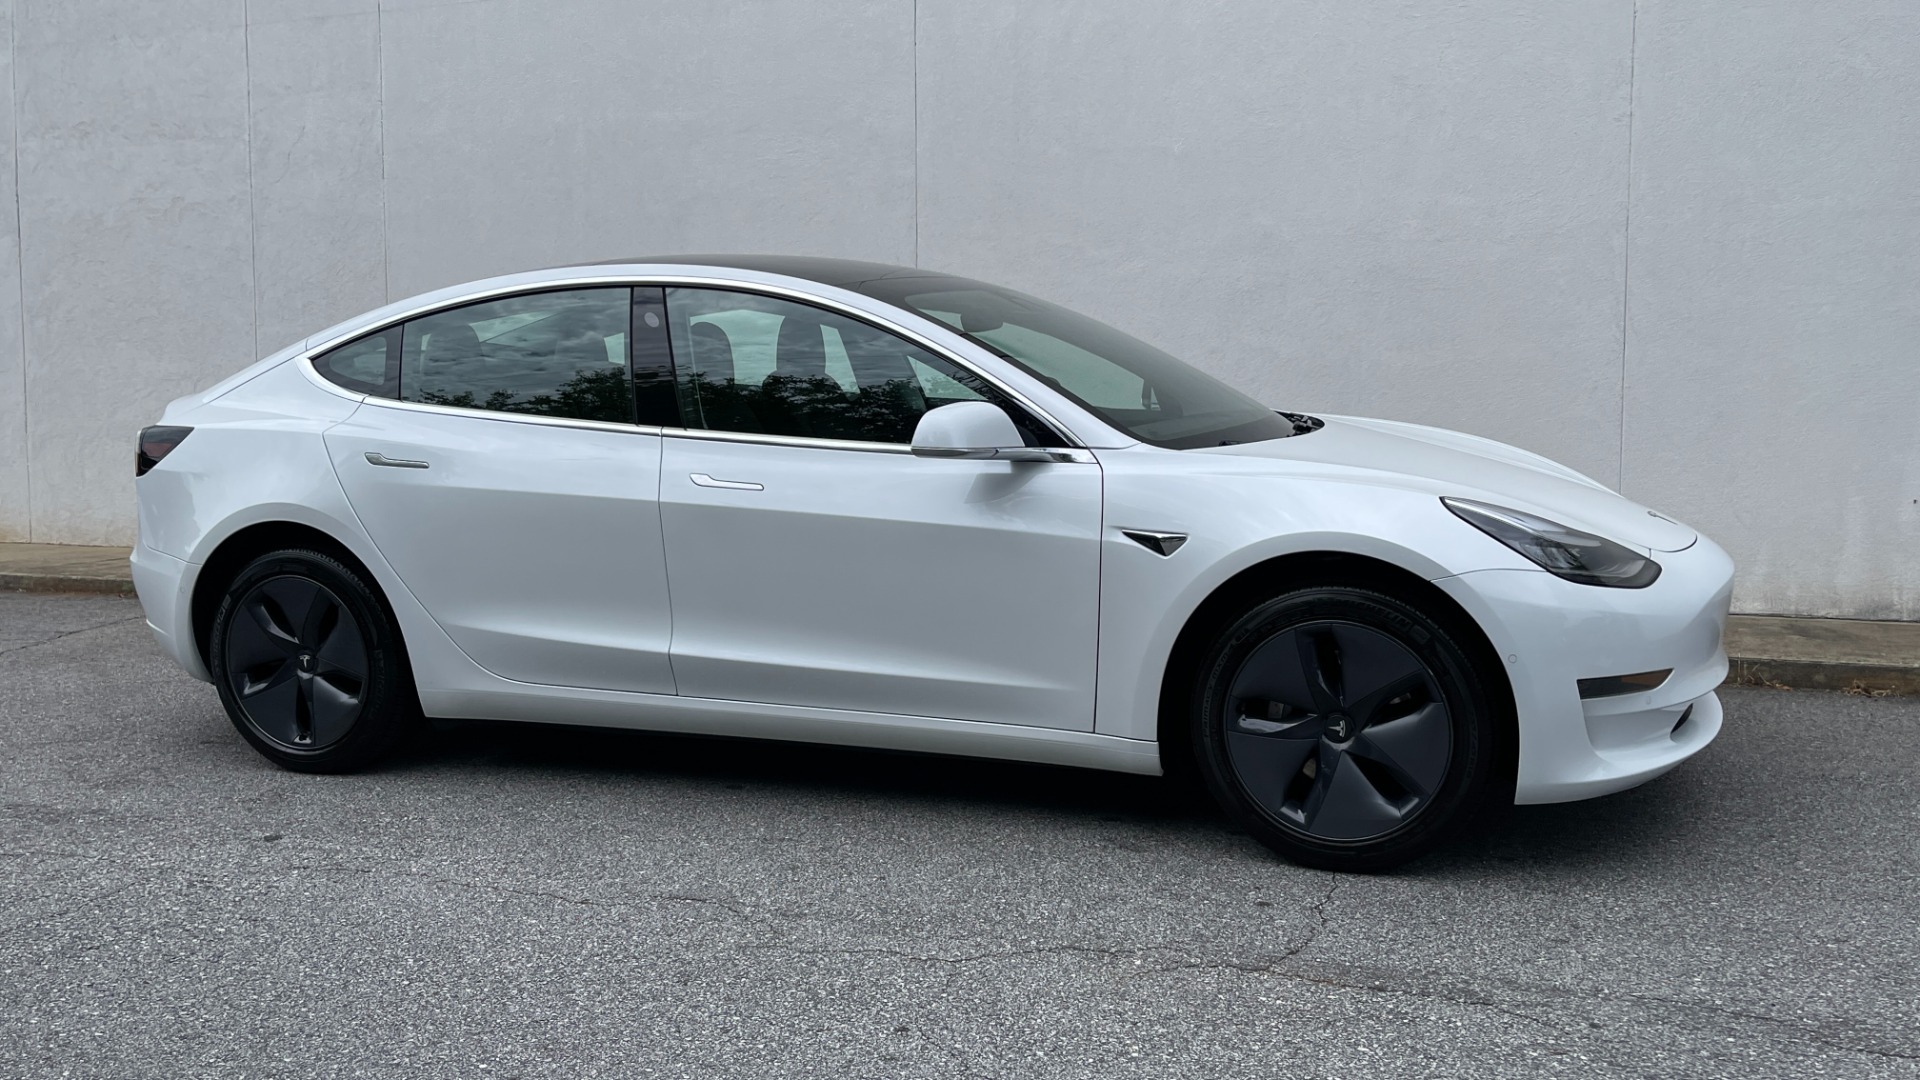 Used 2020 Tesla Model 3 STANDARD RANGE PLUS / AUTOPILOT / STANDARD CONNECTIVITY / PEARL WHITE for sale Sold at Formula Imports in Charlotte NC 28227 3